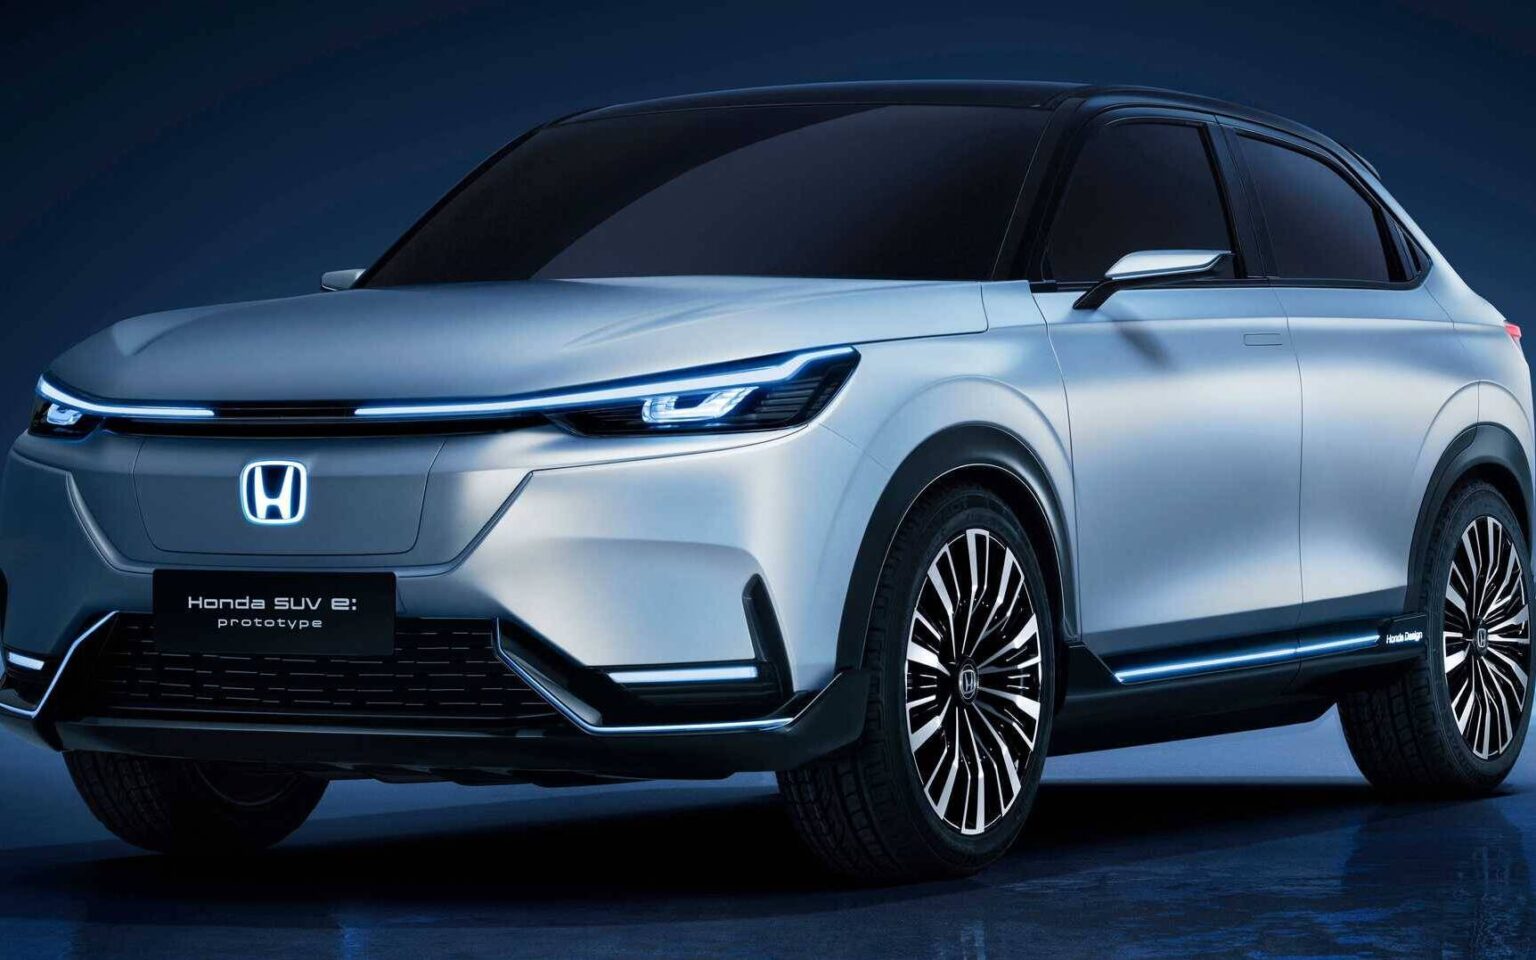 New Honda Prologue Suv Next Chapter In Brands Ev Direction Indo